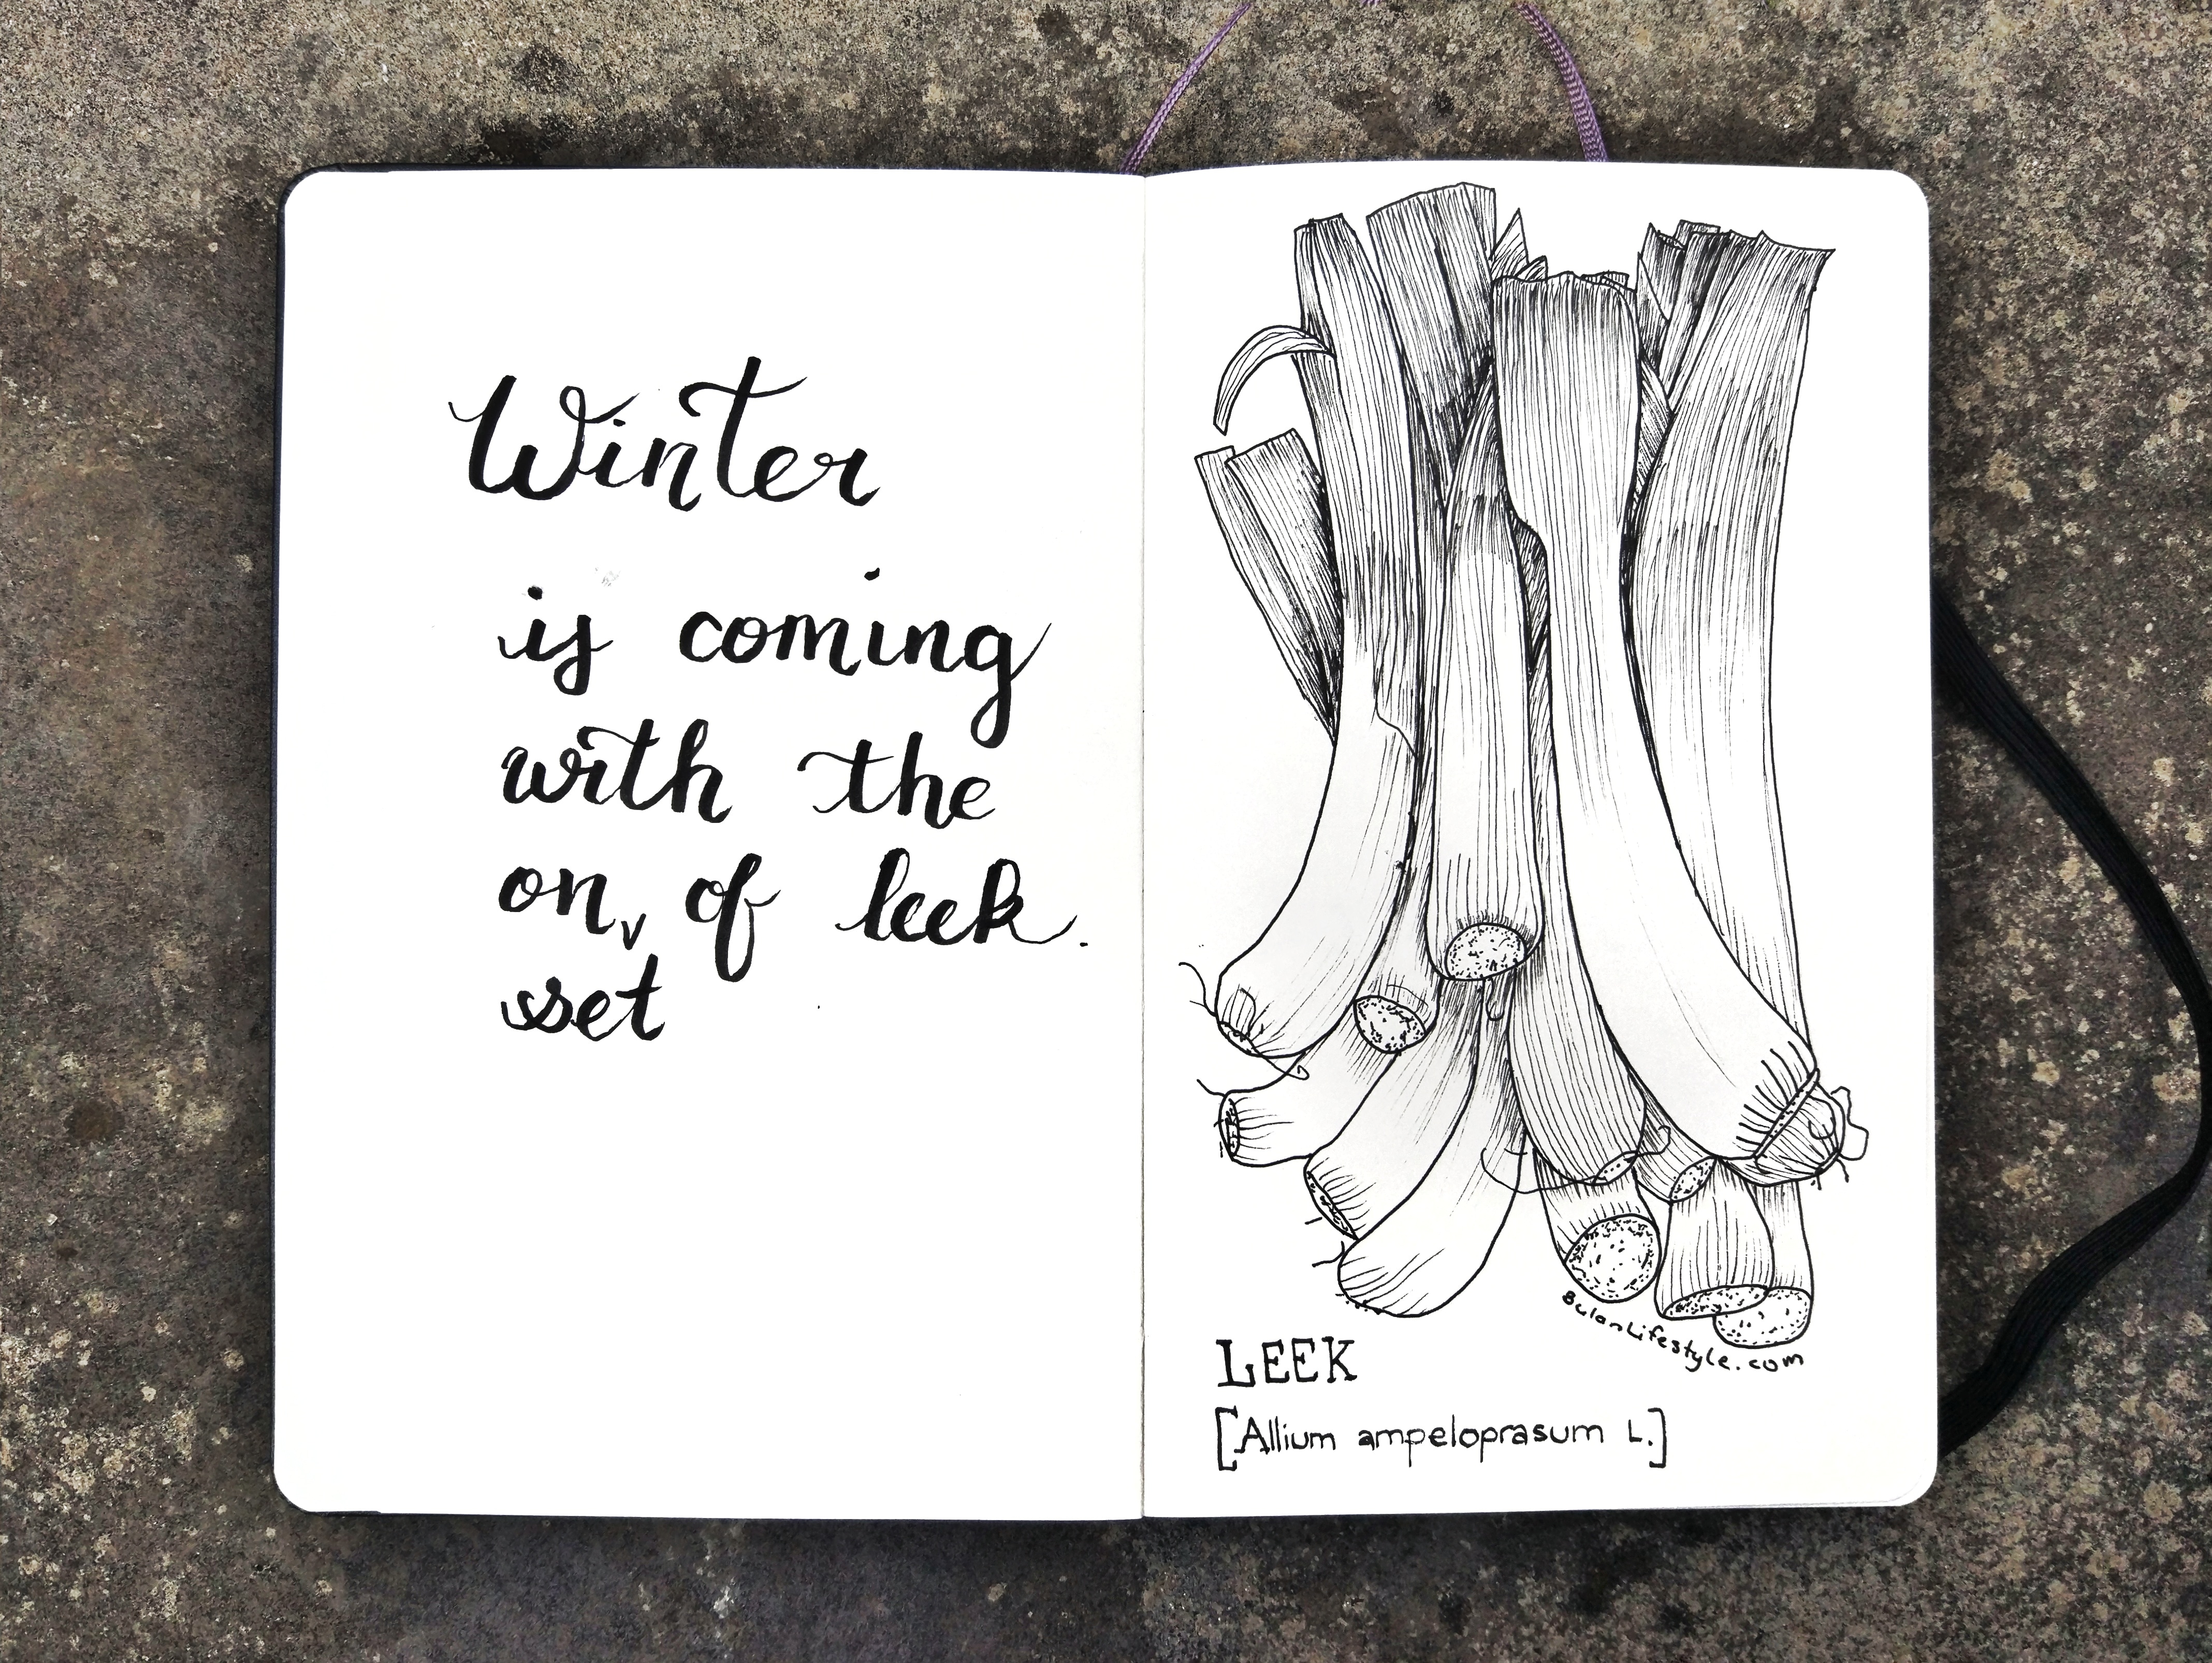 Winter is coming with the onset of leek